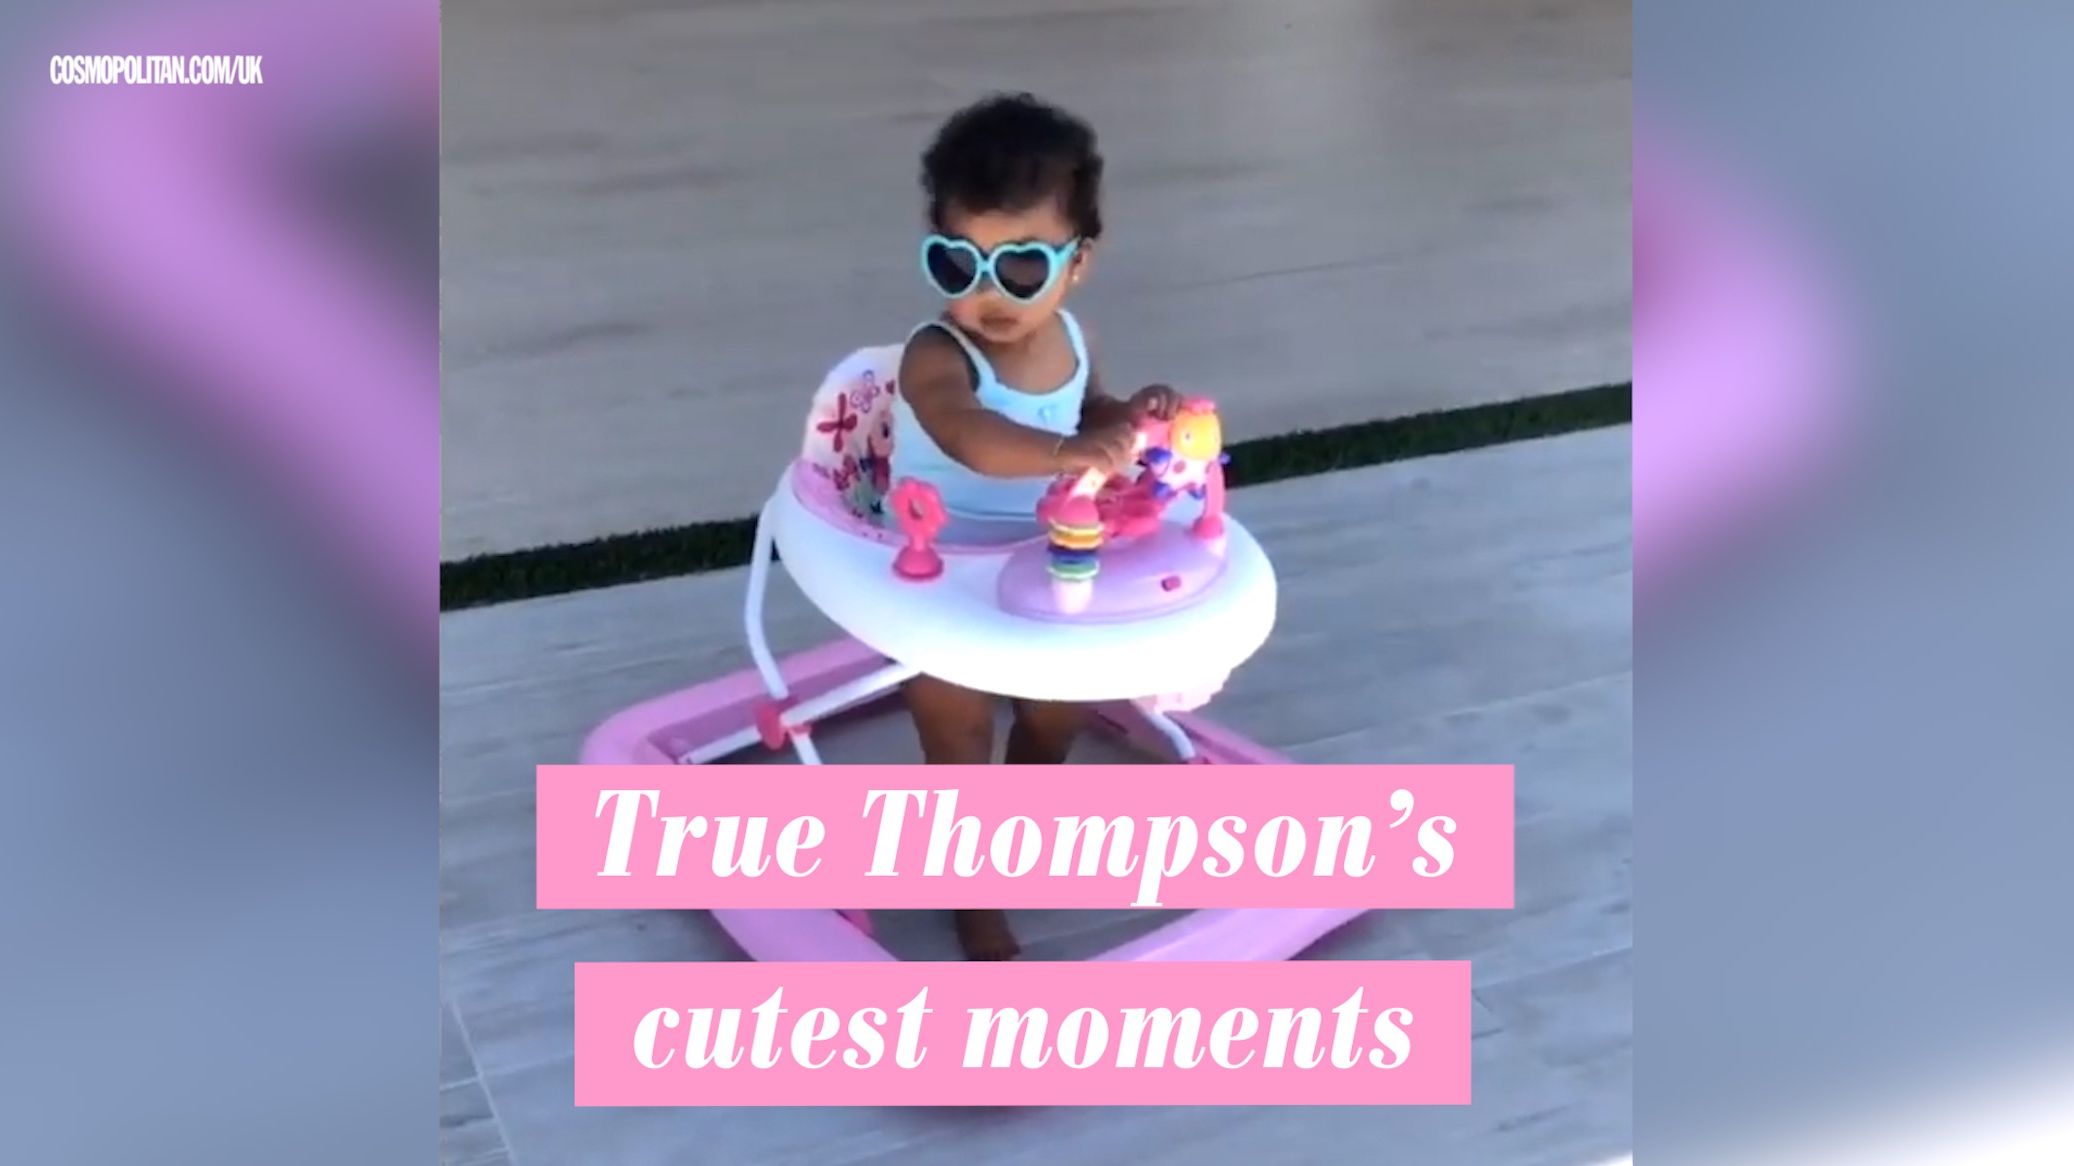 Baby True Surrounded by Birkin Bags: Pics - New Pictures of True Thompson